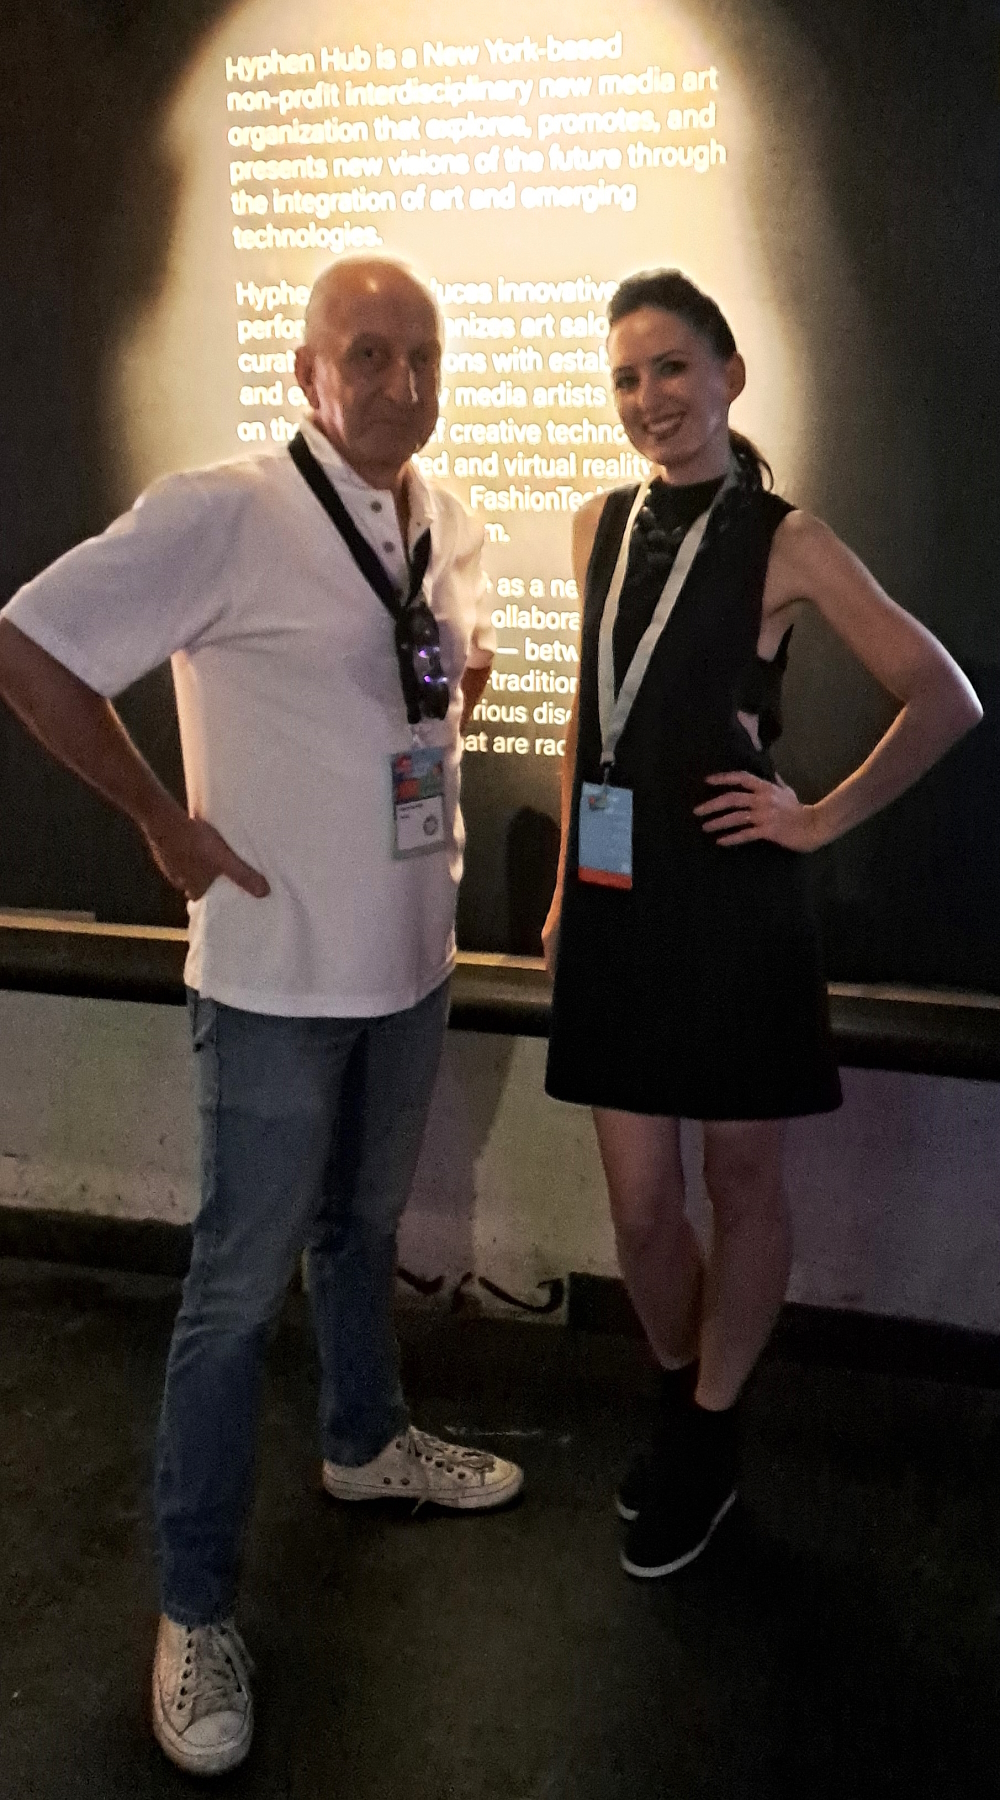 Tiffany Trenda and Divine Spark founder Thomas Hammerl at Ars Electronica 2023 in Linz, Austria.